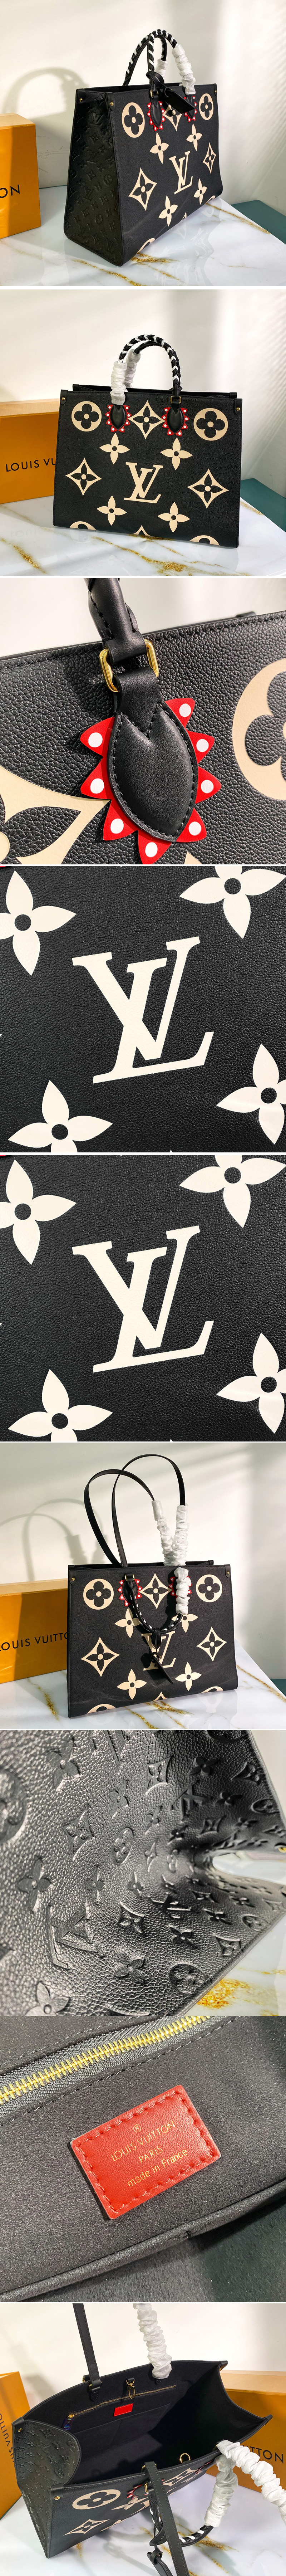 Replica Louis Vuitton M45373 LV Crafty OnTheGo GM tote bag in Black Embossed grained cowhide leather